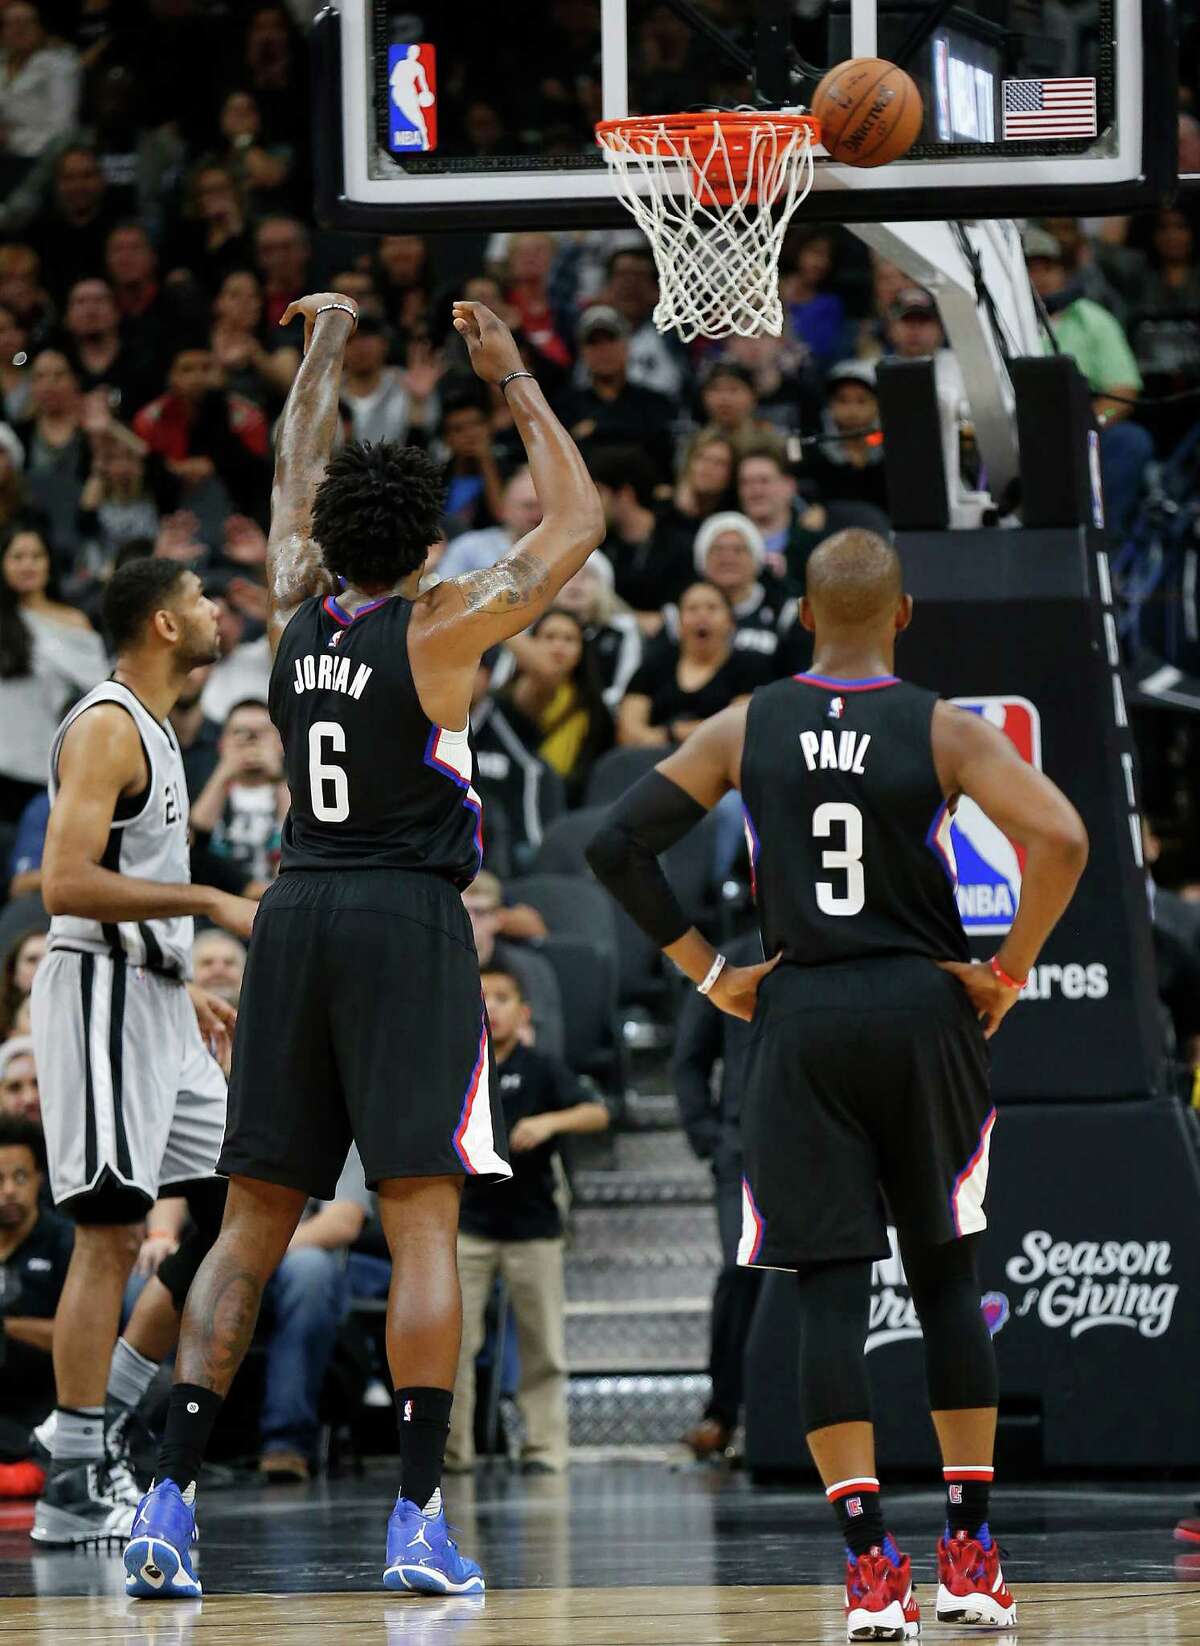 Clippers' DeAndre Jordan (05) misses a free throw against the Spurs at the AT&T Center on Friday, Dec. 18, 2015. Spurs defeated the Clippers, 115-107. (Kin Man Hui/San Antonio Express-News)